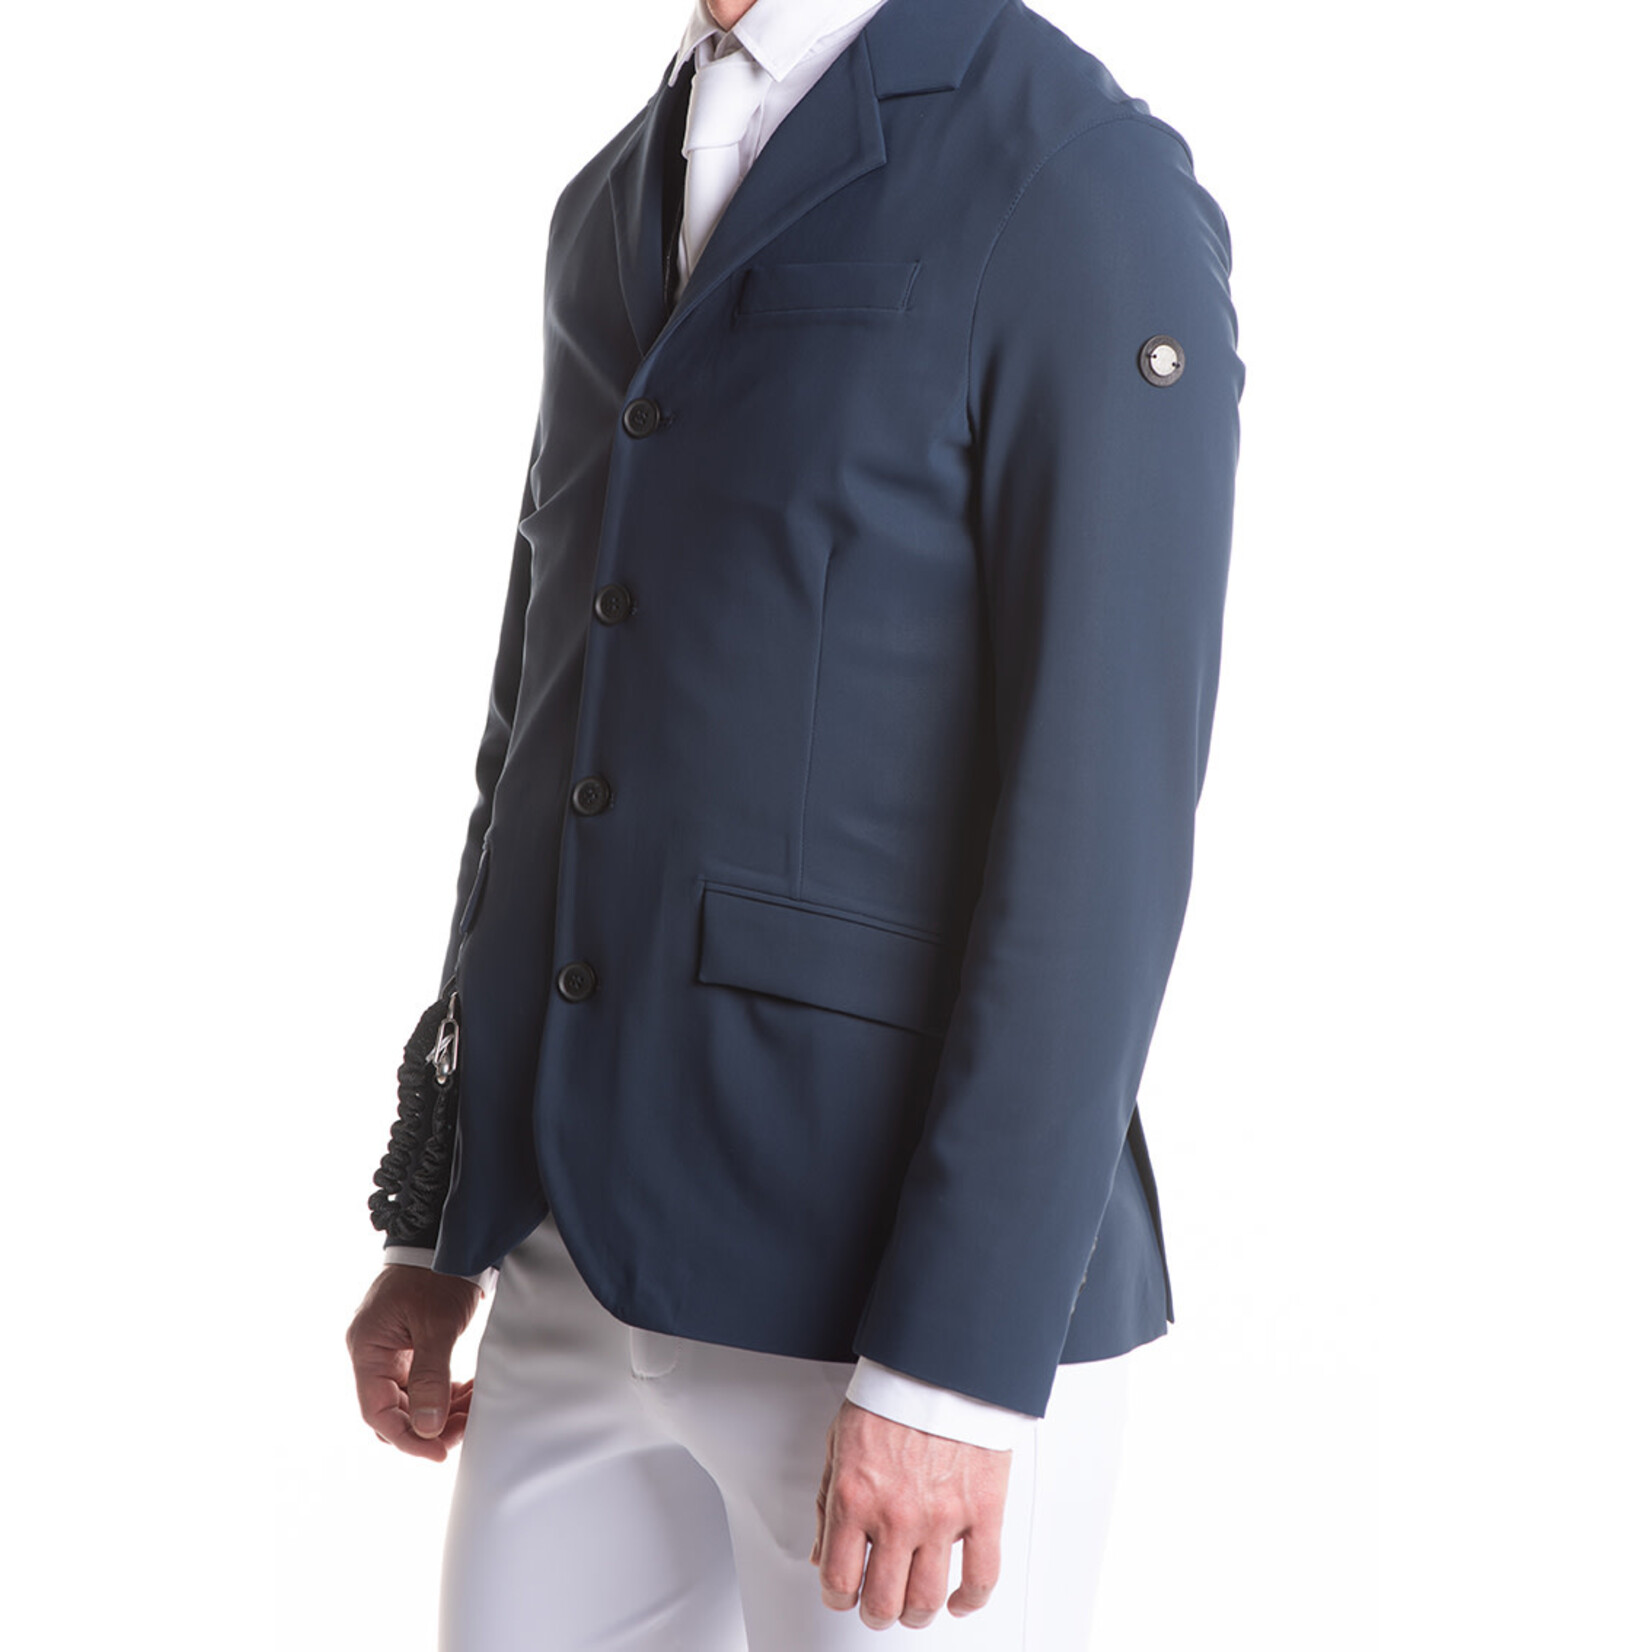 Freejump 2021 Freejump Men's   Airbag Show Coat, Jean Lite, with more styled fit, new fabric and redesigned style